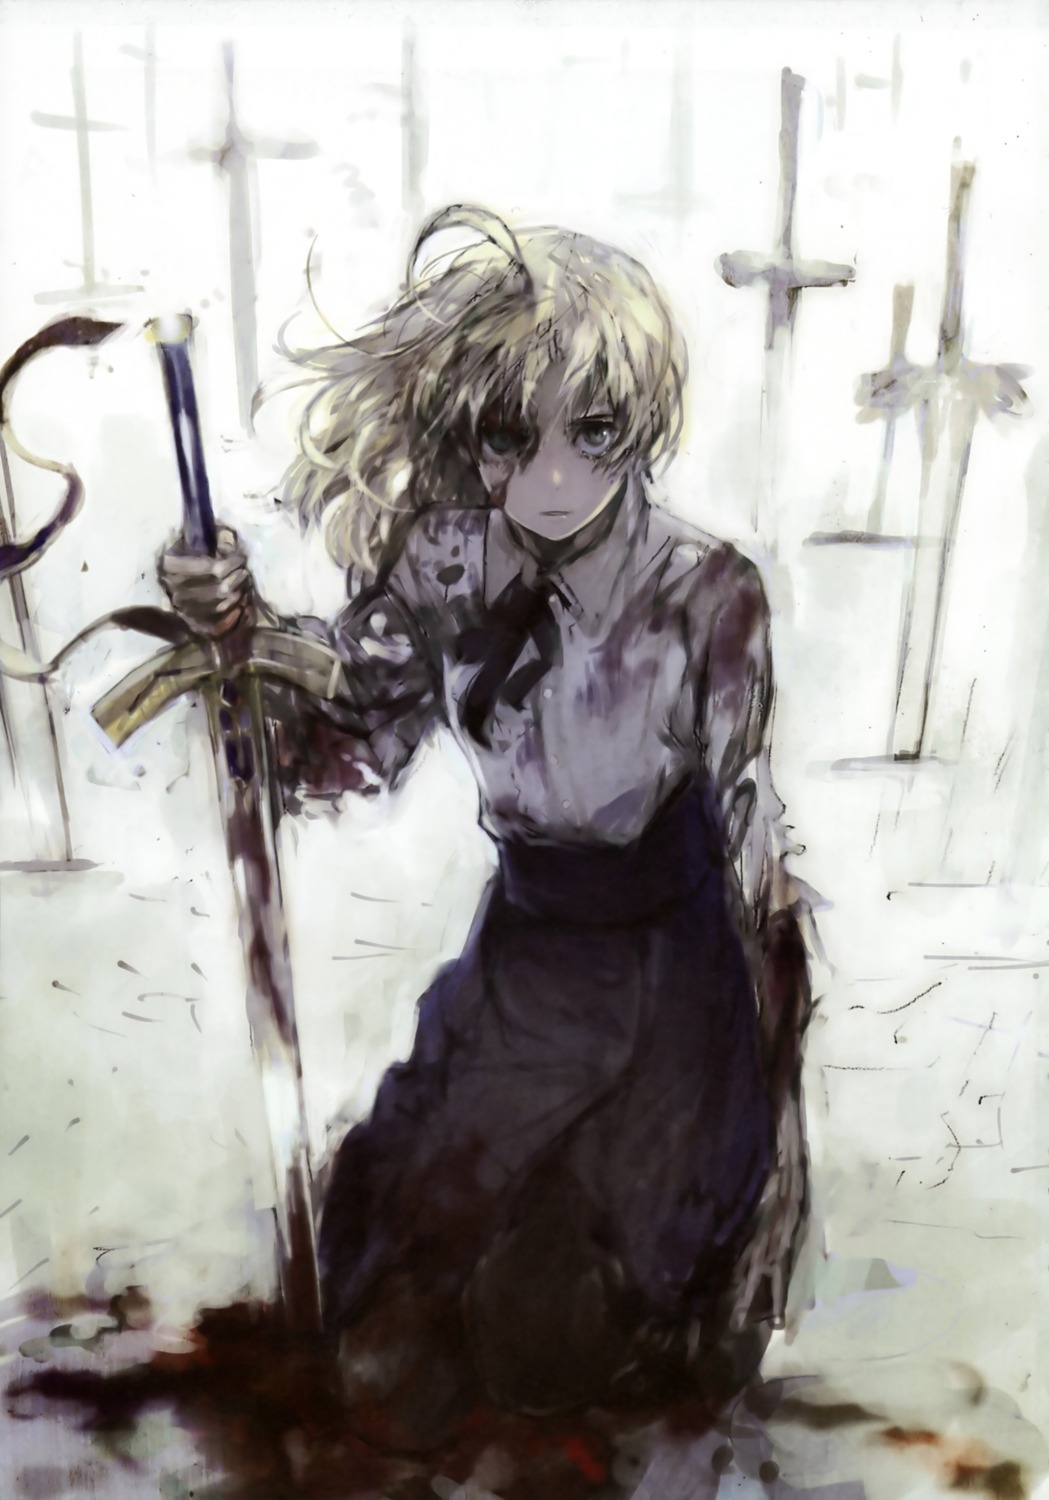 blood fate/stay_night saber sword toi8